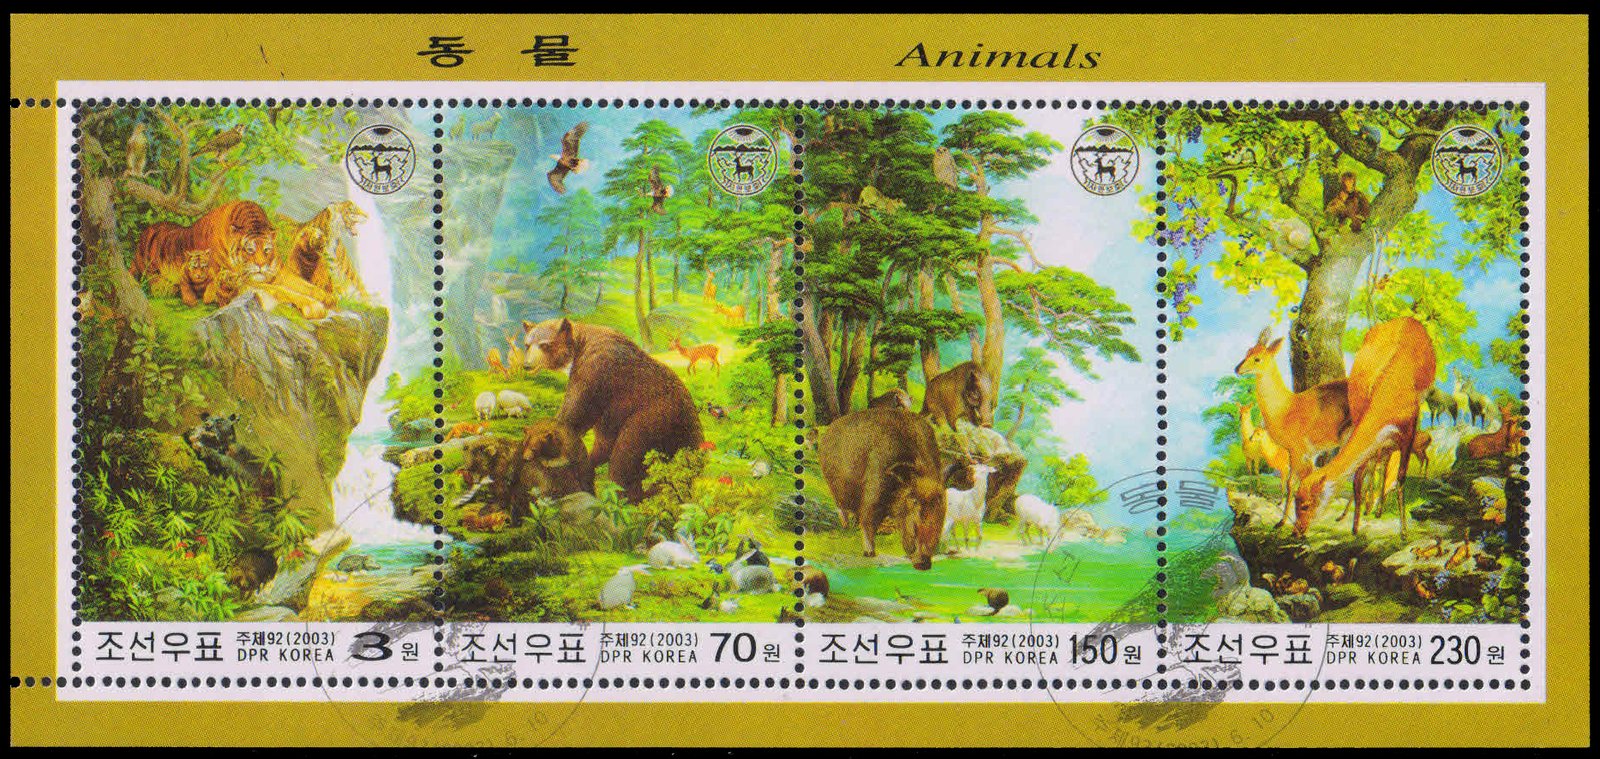 NORTH KOREA 2003-Animals, Tigers, Bears, Wild Boar, Deer, M/s of 4 Stamps, First Day Cancelled, MNH-S.G. MS N 4315-Cat £ 11.50